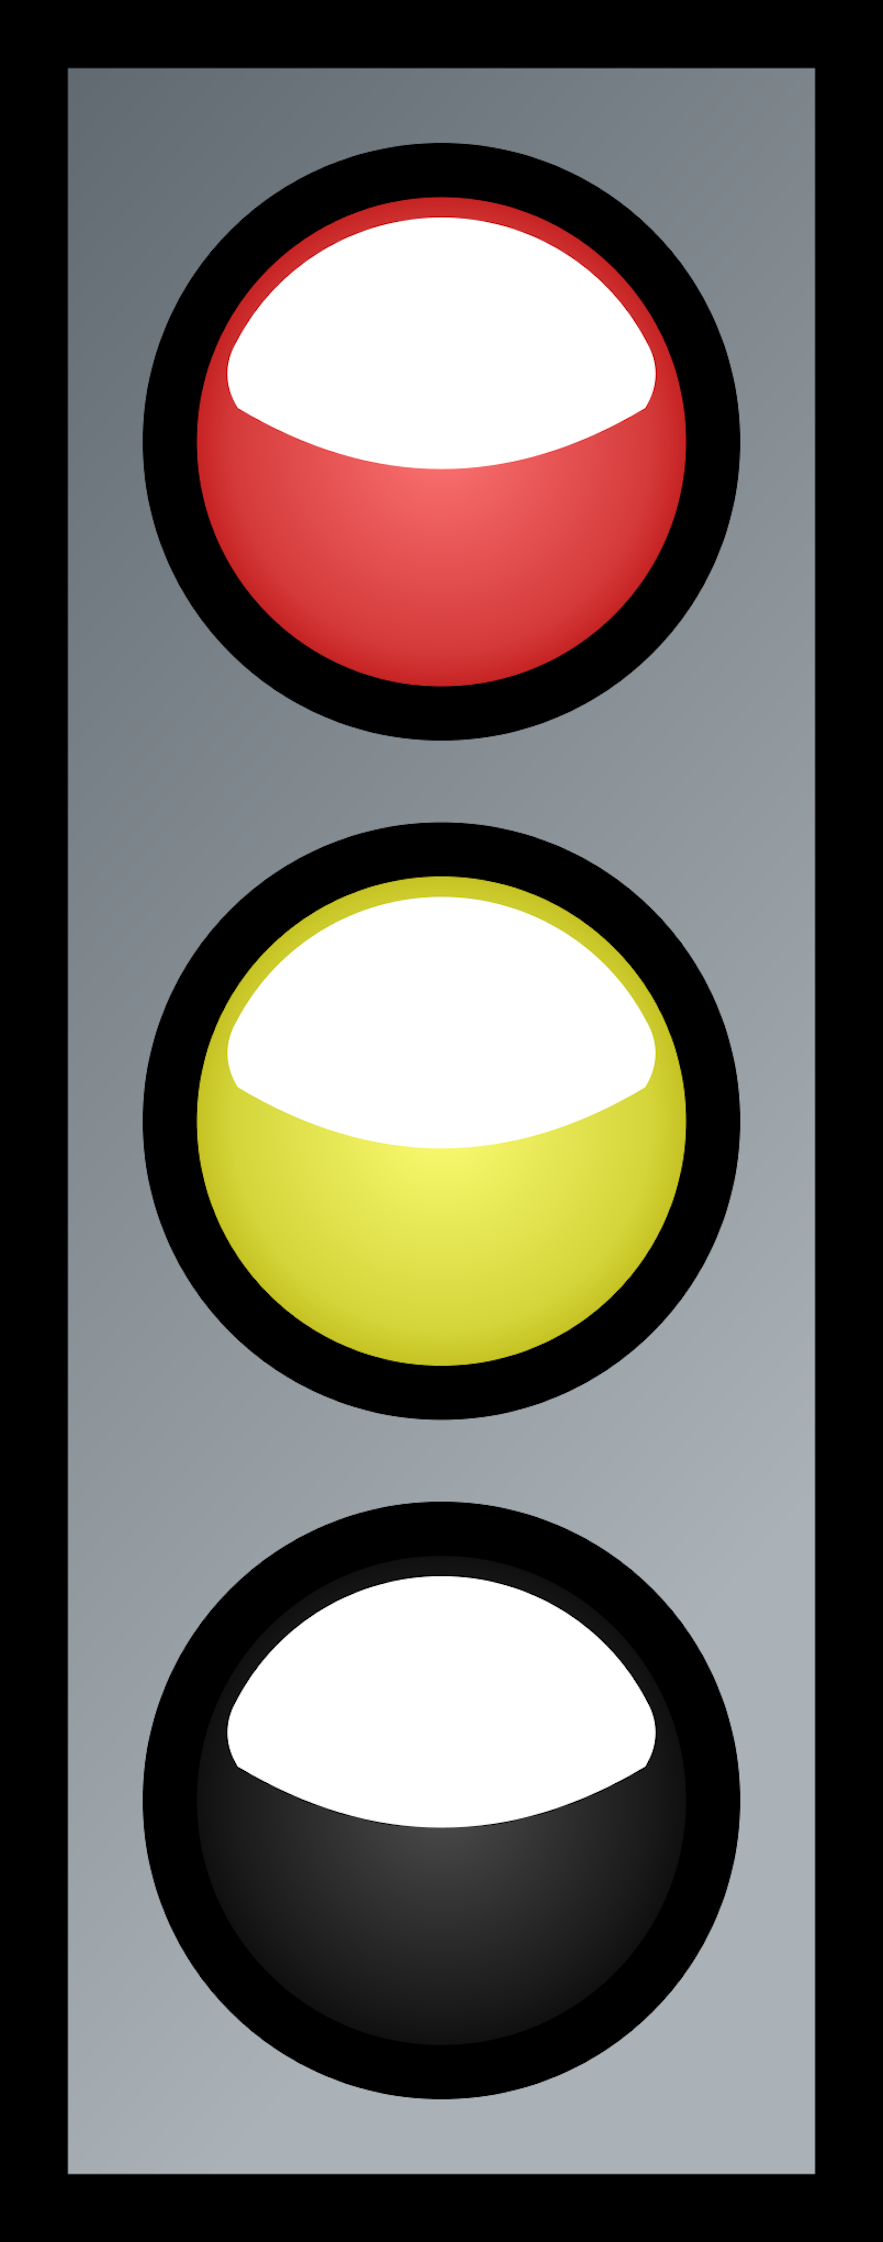 A red and yellow traffic light in Iceland shows the light is about to turn green, so you can get ready to go.